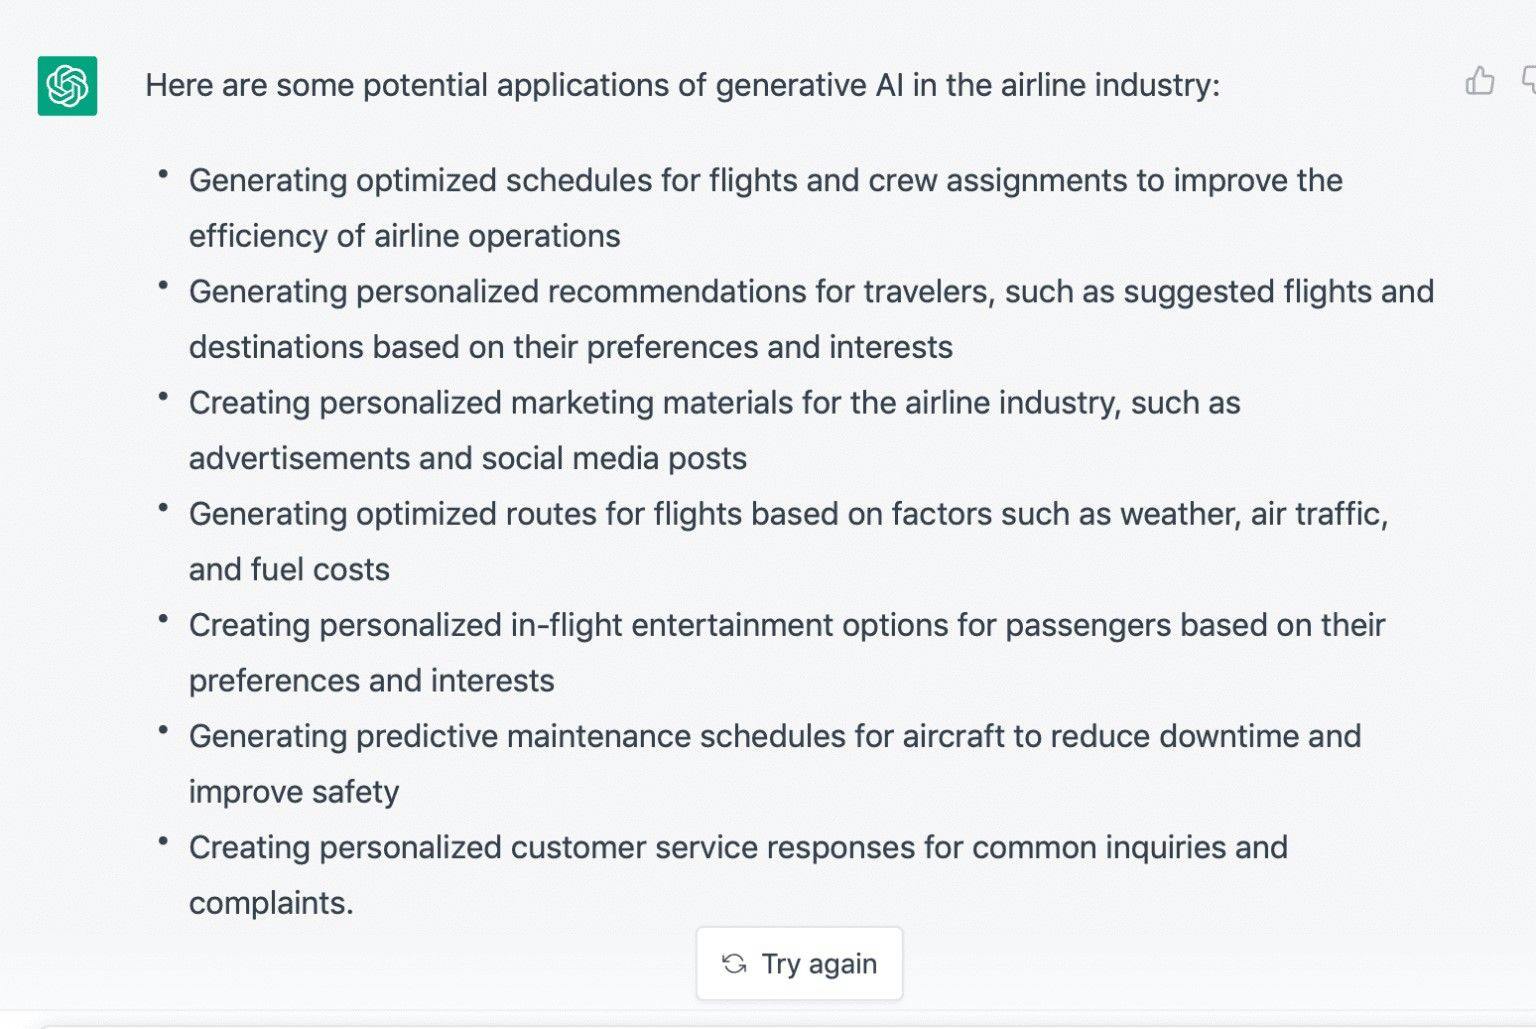 What are the applications of Generative AI in the airline industry?